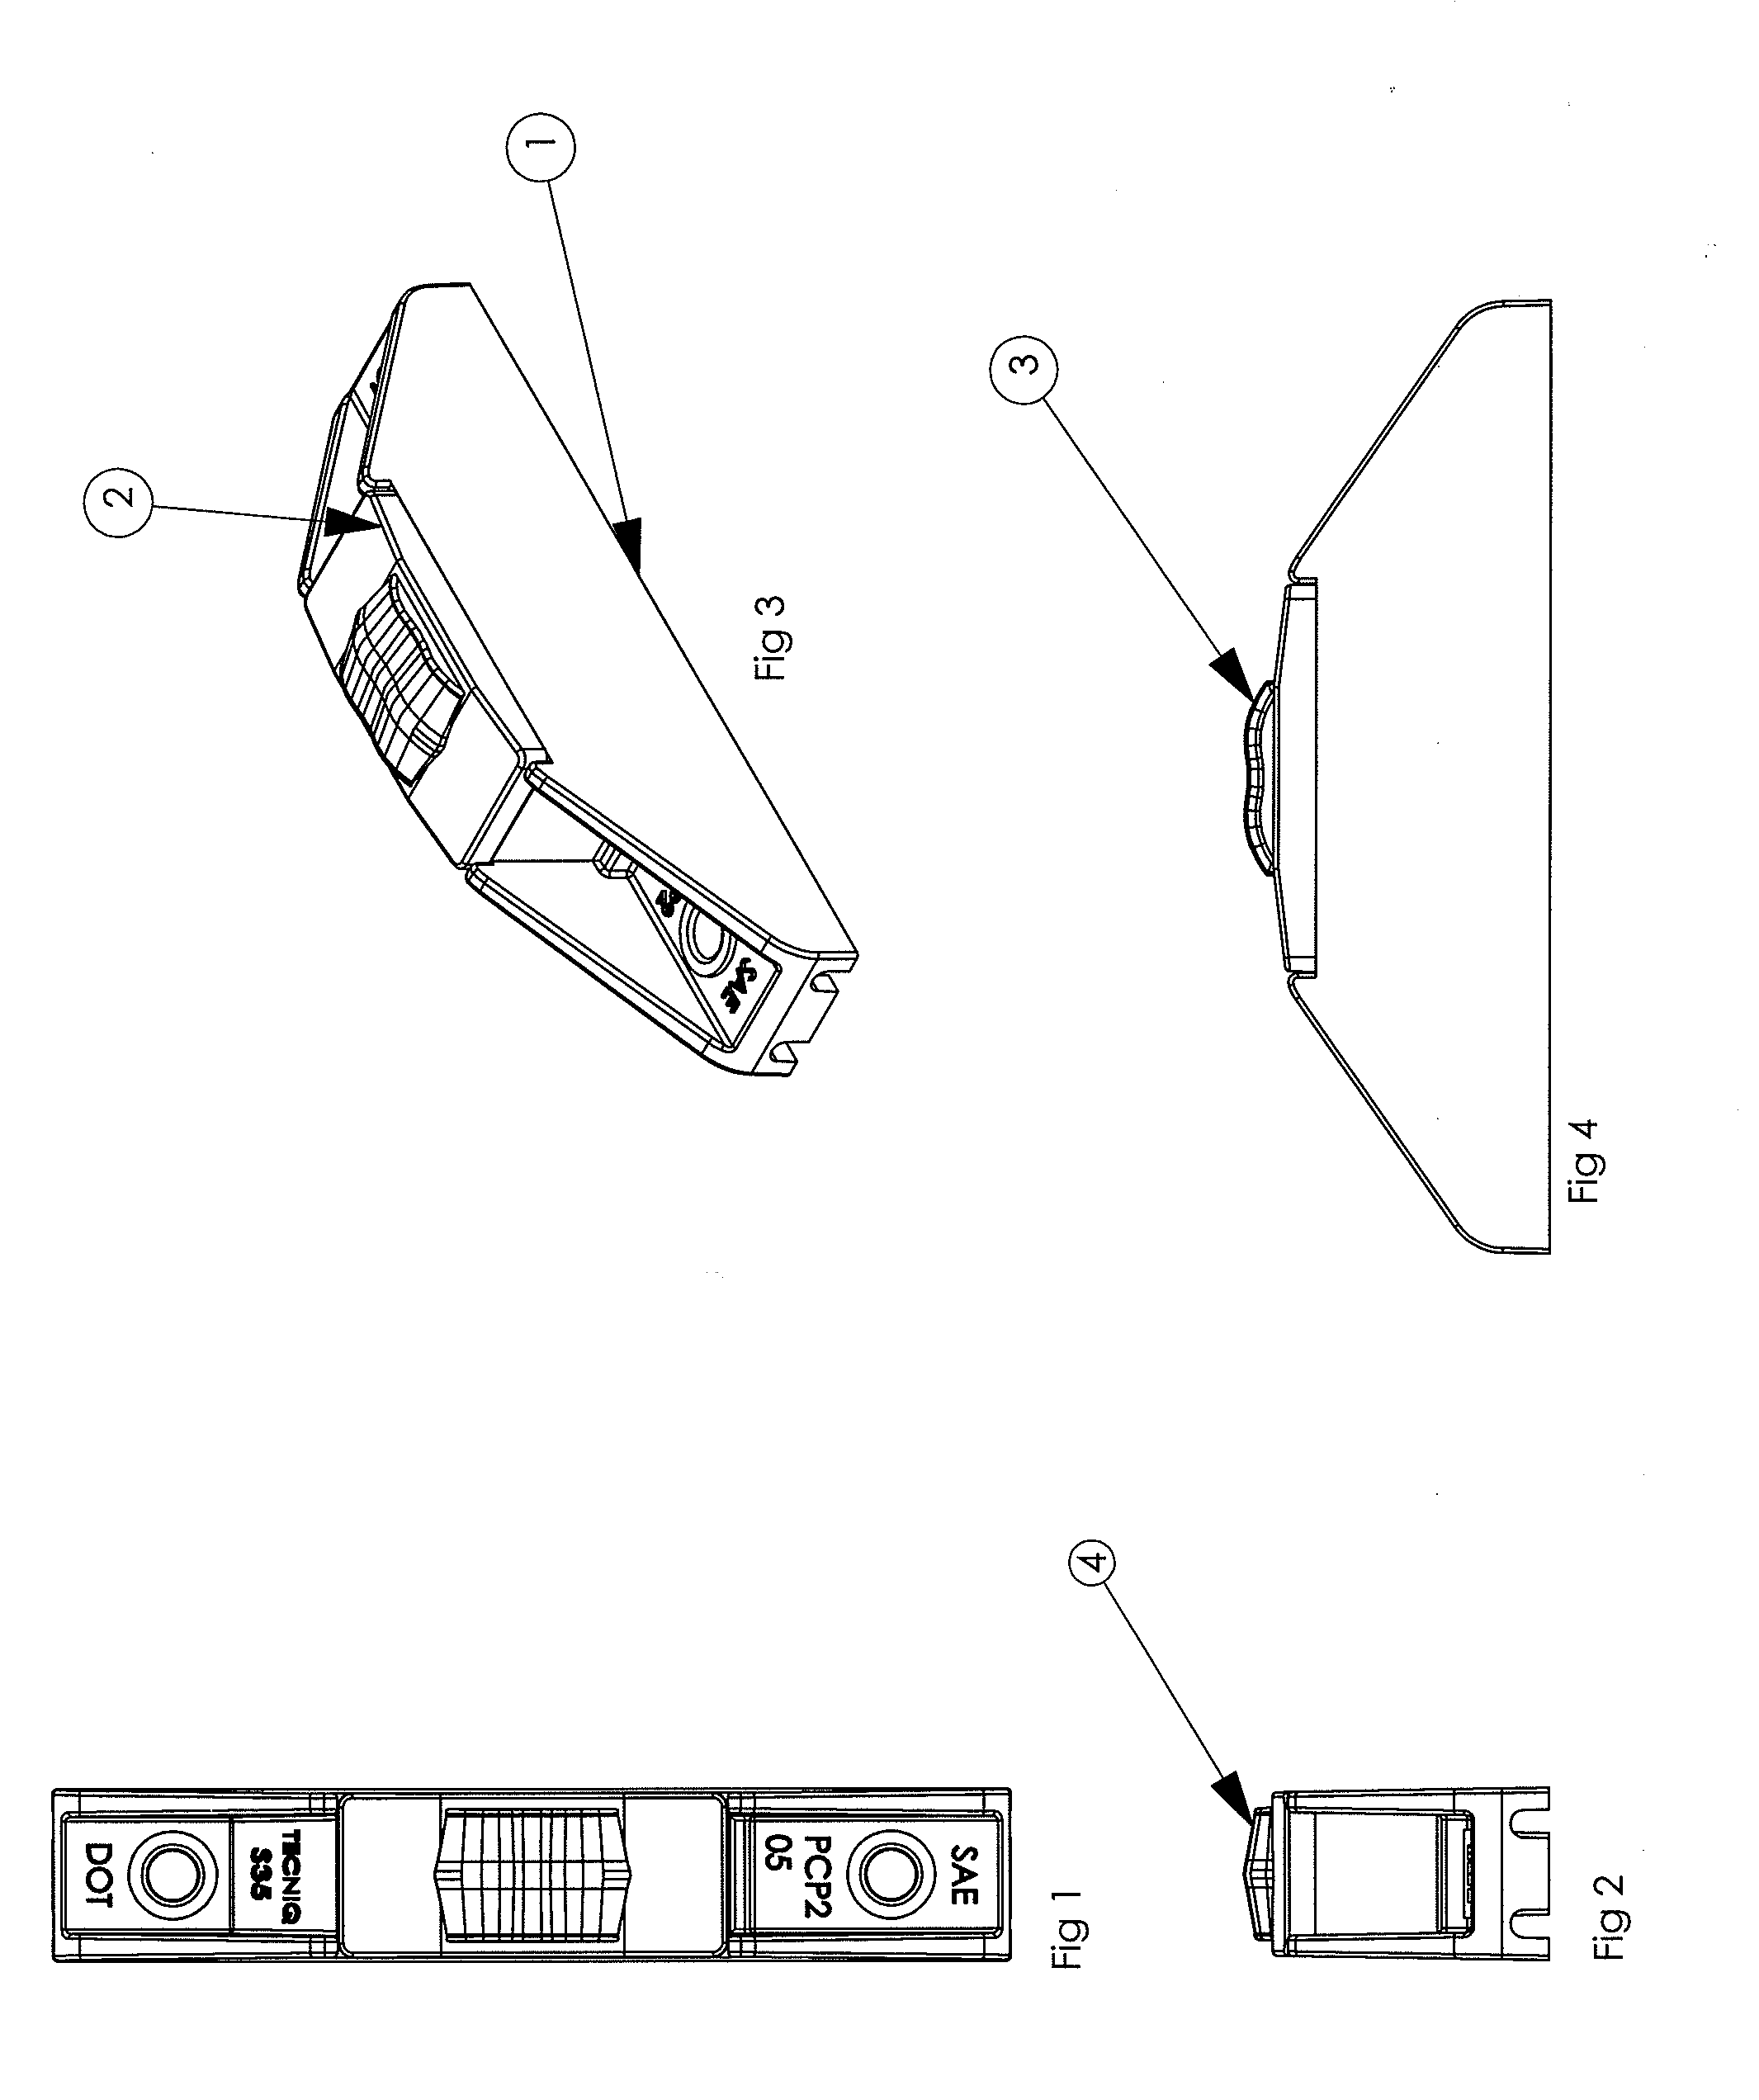 Method and apparatus for creating optical images